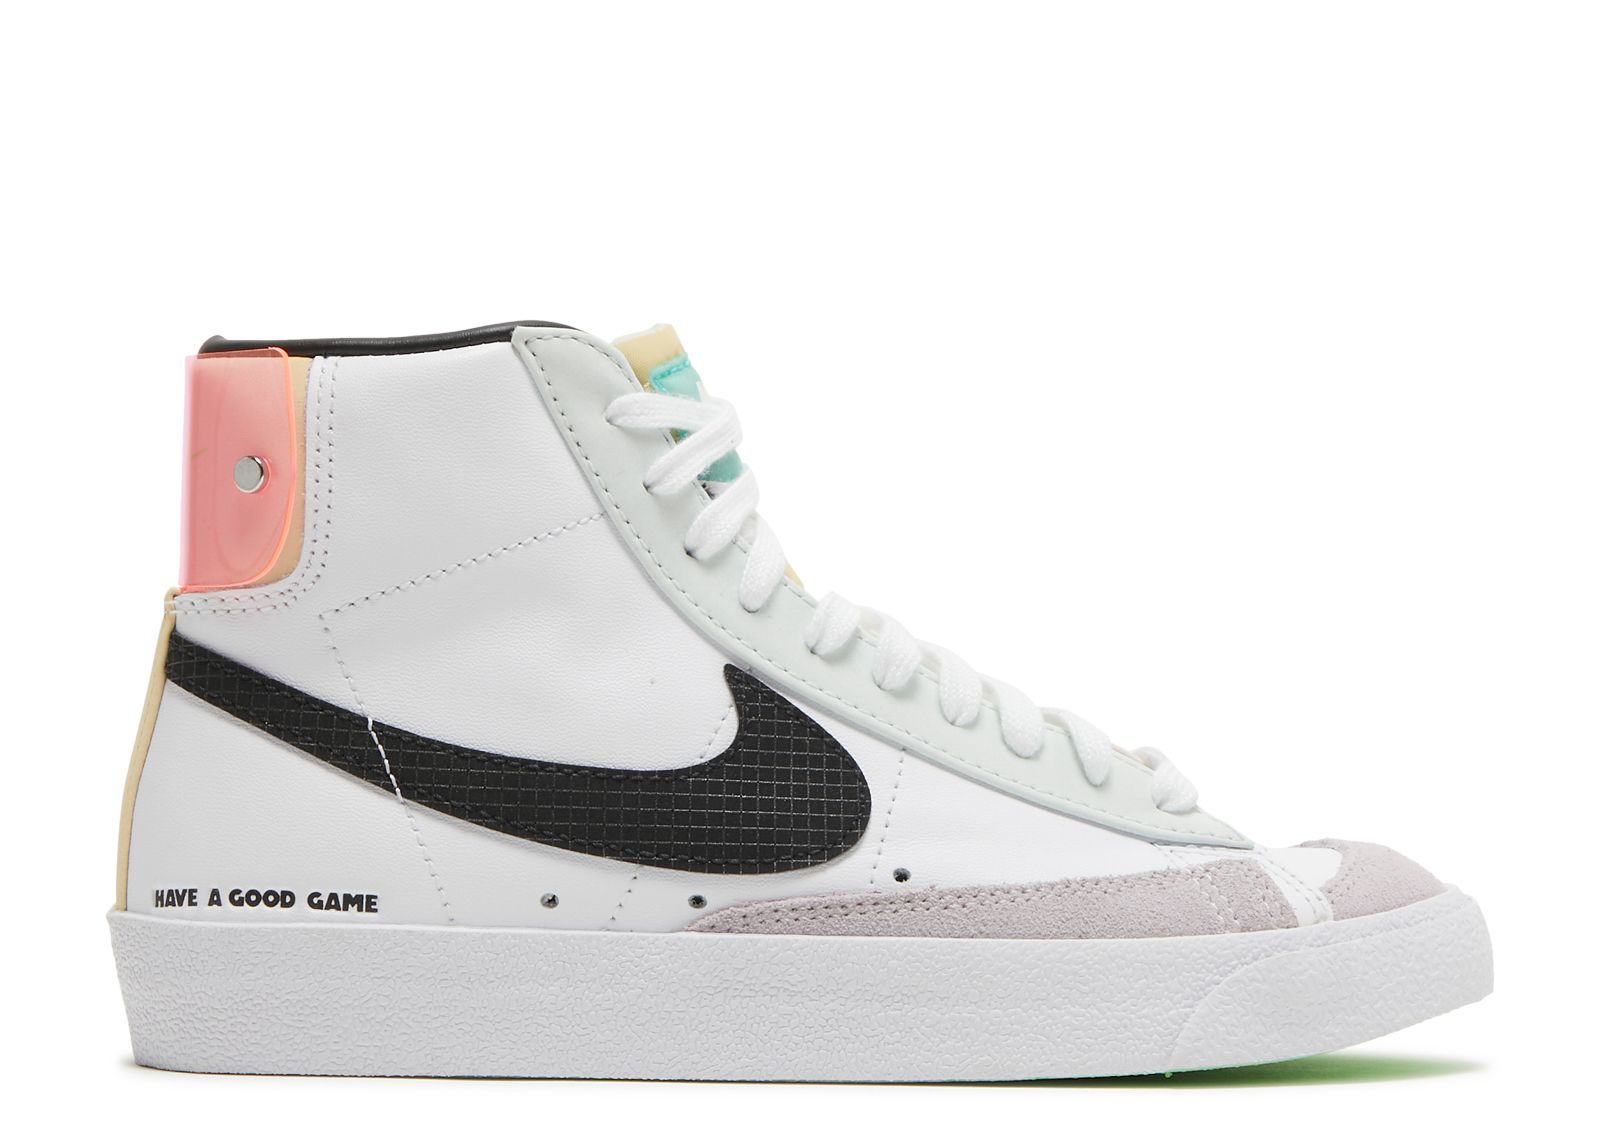 Кроссовки Nike Wmns Blazer Mid '77 'Have A Good Game', белый nike blazer mid 77 vintage multi have a good day casual sports skateboard shoes for men unisex women sneaker